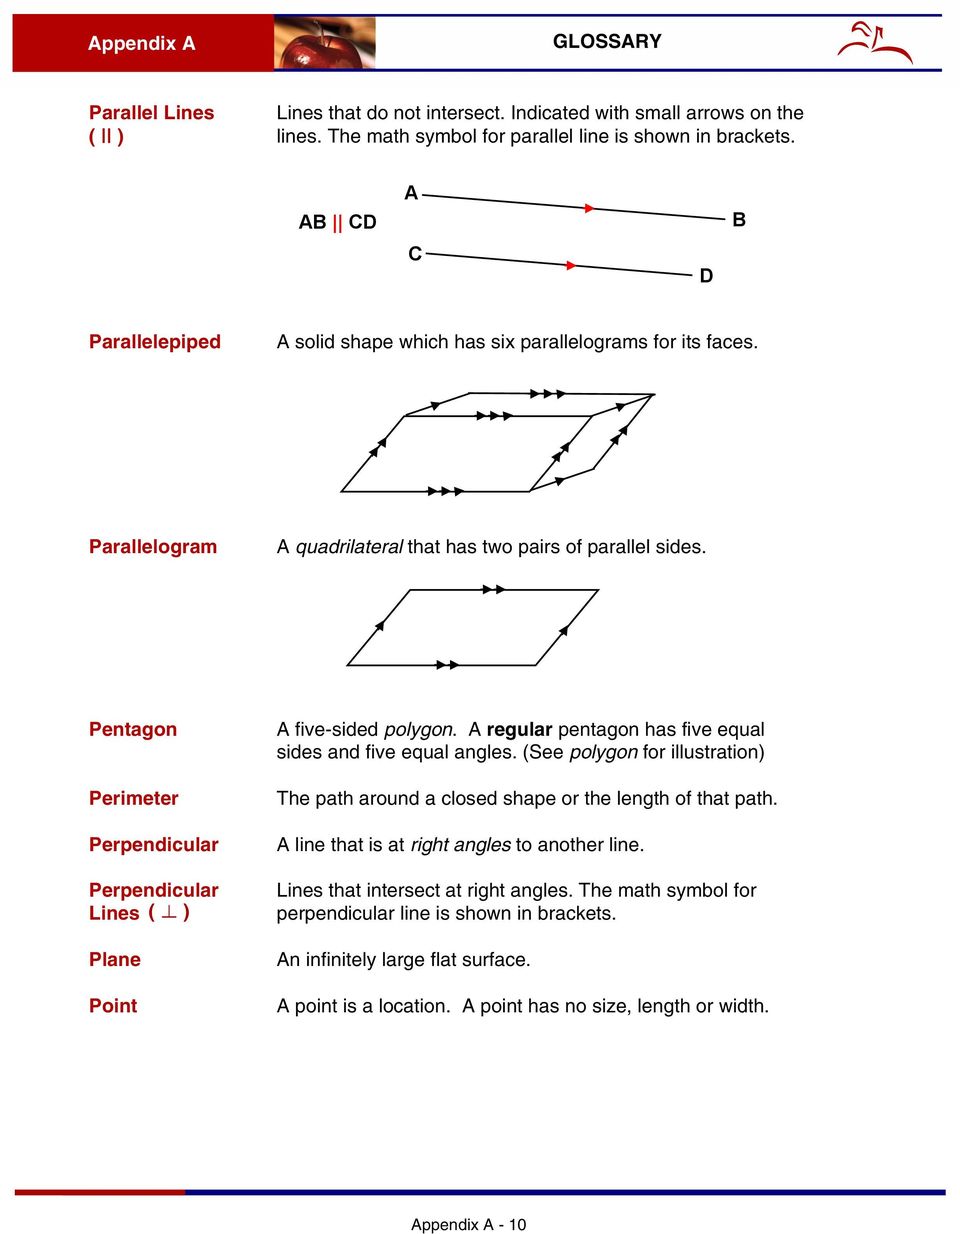 Pentagon Perimeter Perpendicular Perpendicular Lines ( z ) Plane Point A five-sided polygon. A regular pentagon has five equal sides and five equal angles.